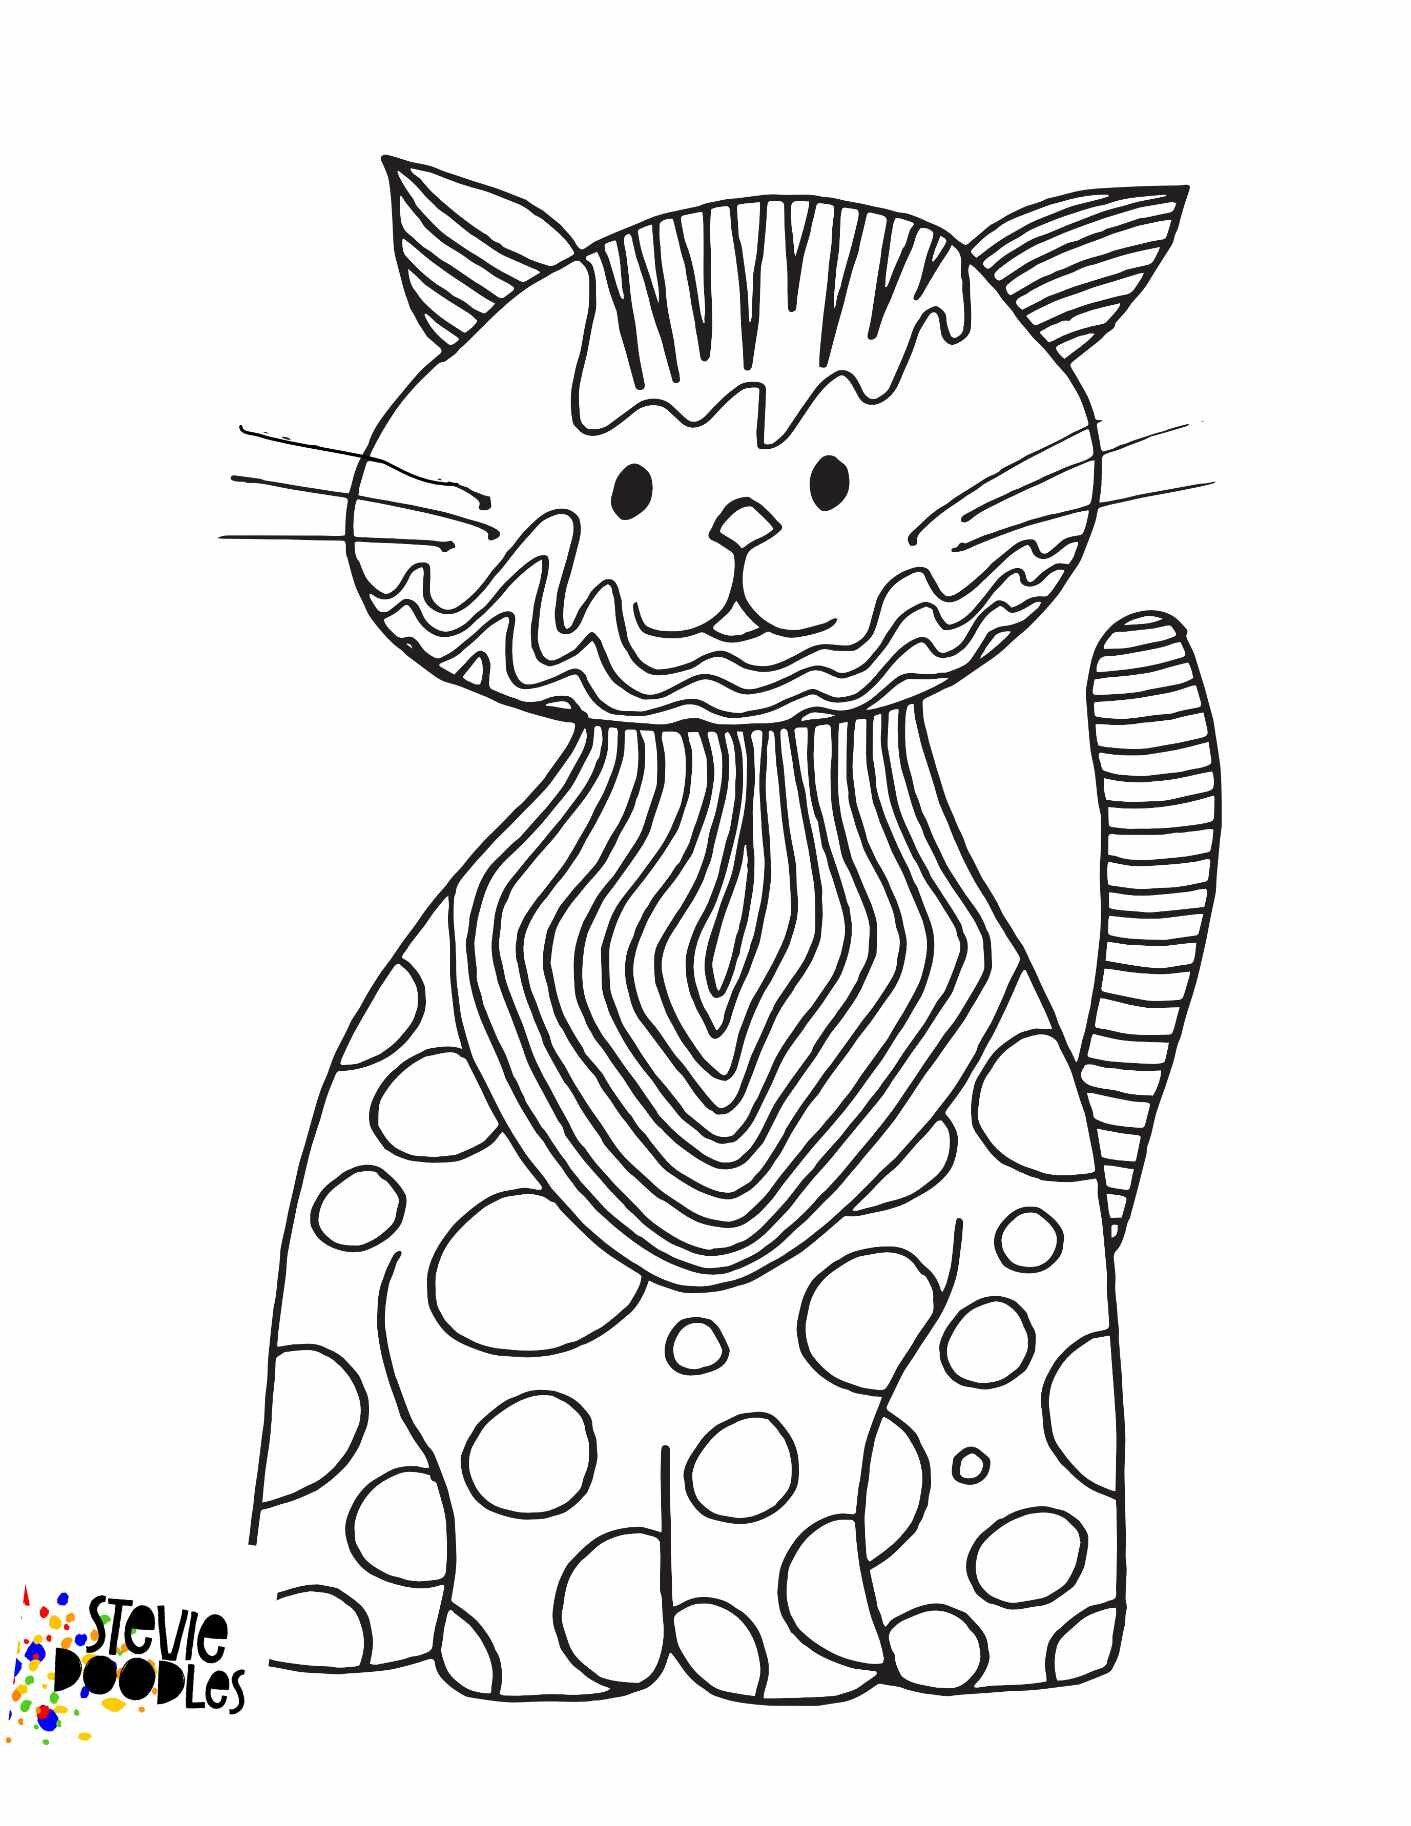 Free Cat Coloring Page!! CLICK HERE TO DOWNLOAD THE PAGE ABOVE